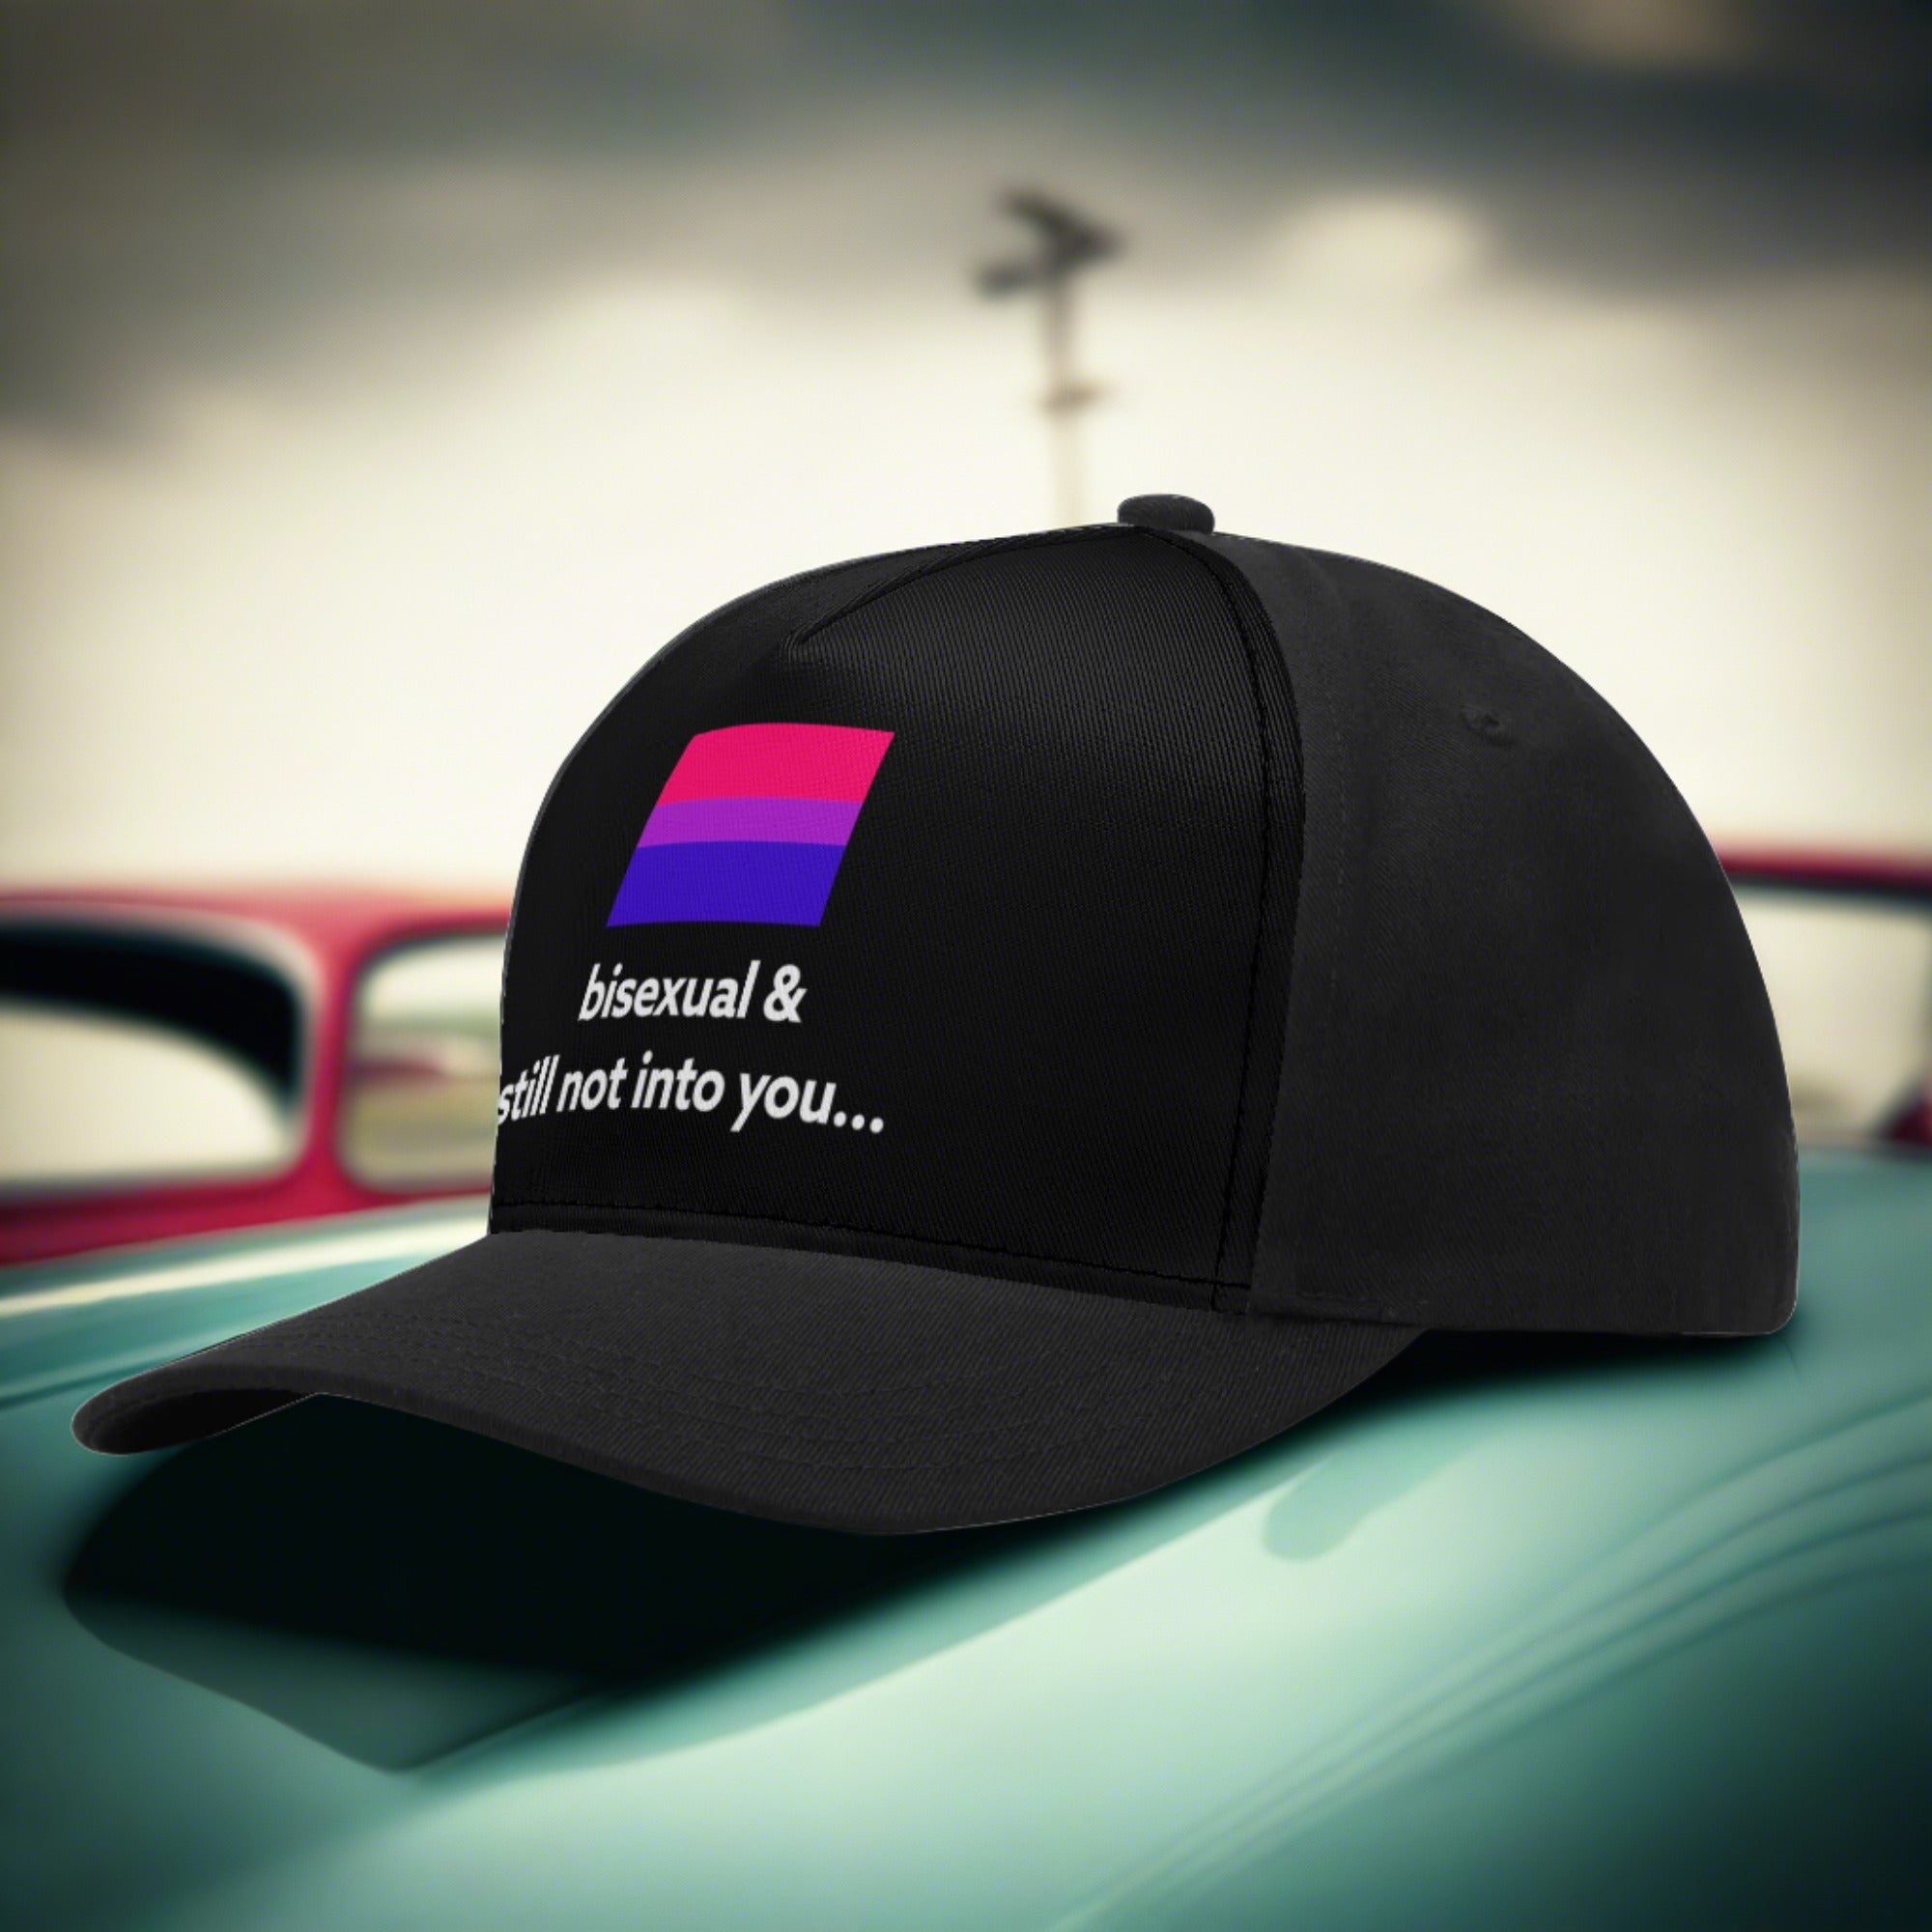 bisexual and still not into you pride hat sitting on a vintage car